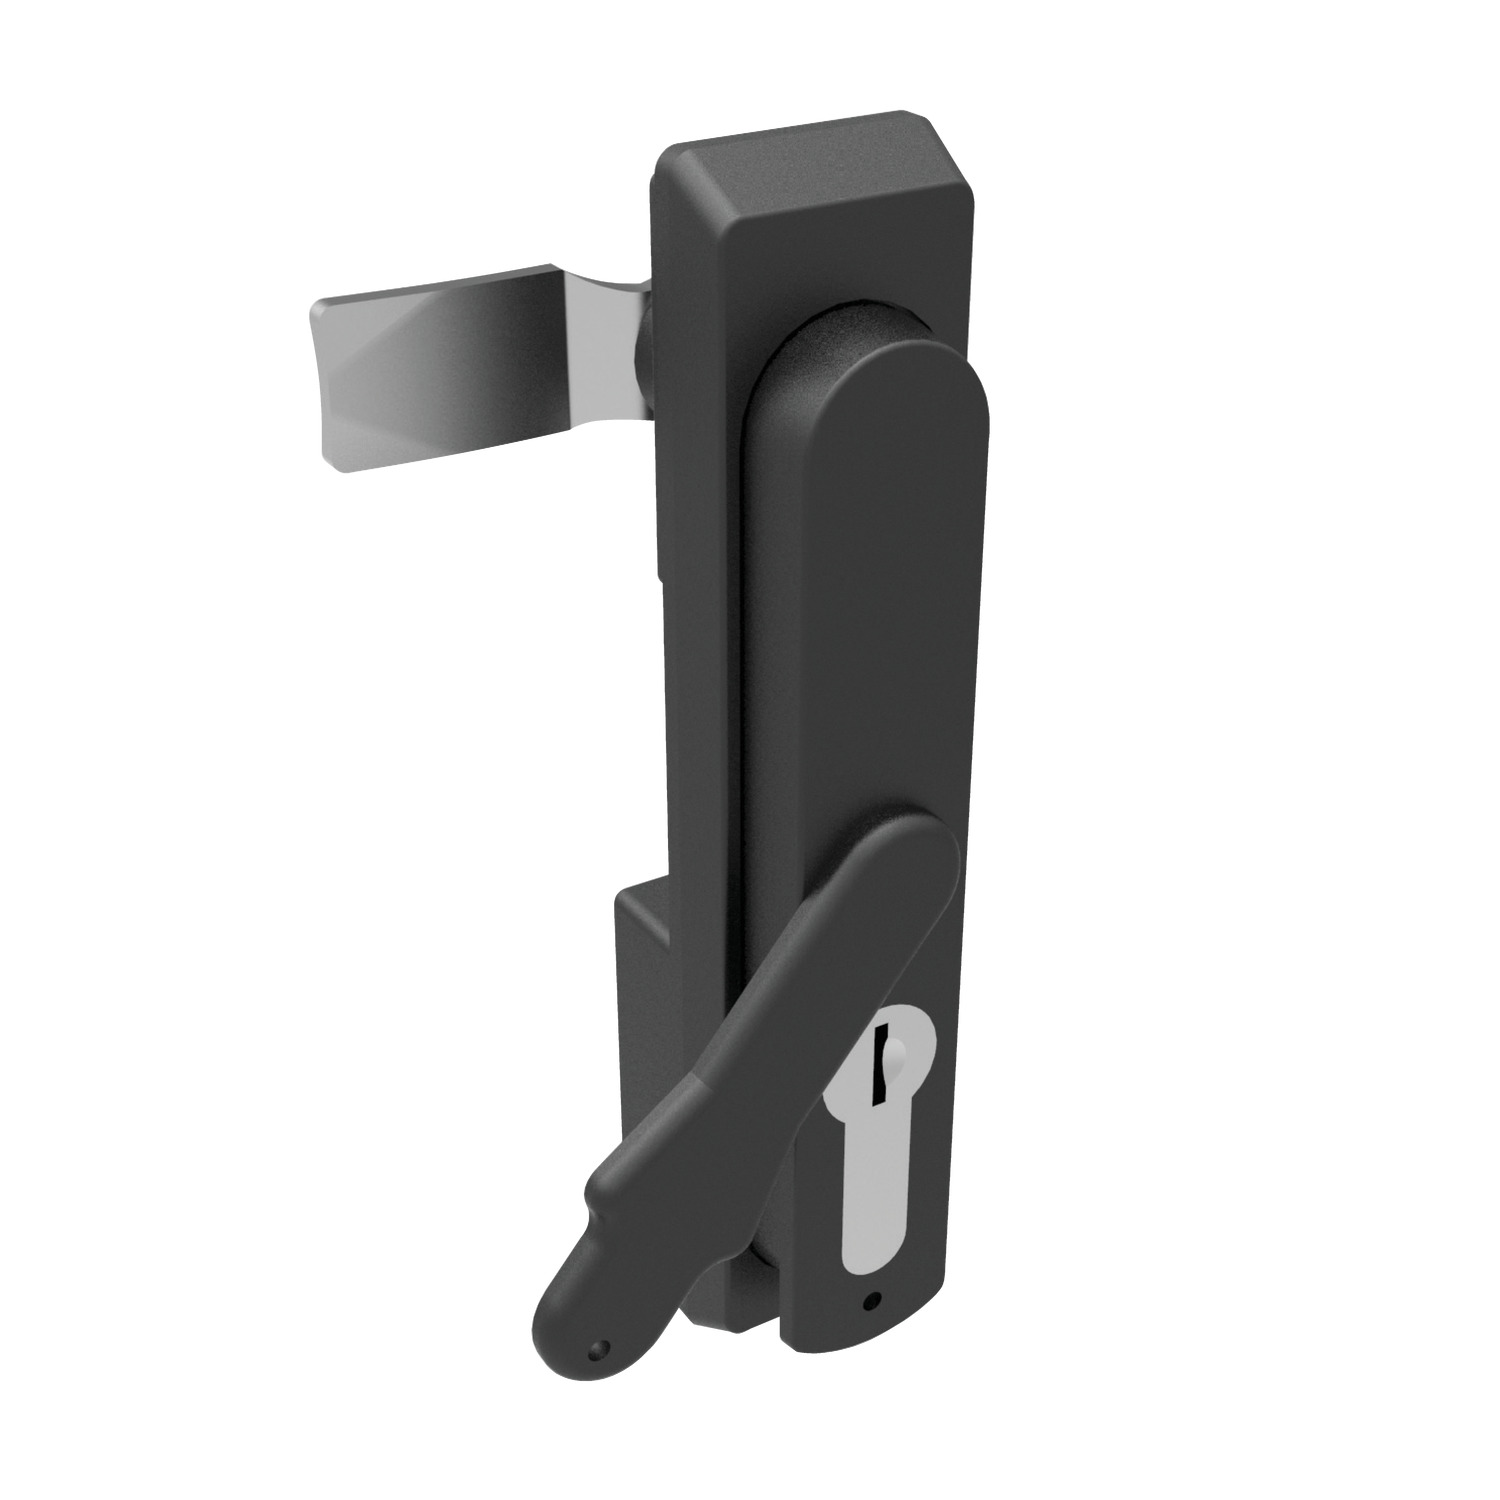 B1091.AW0020 Swing Handles with dust cover. Body and Handle Polyamide. 40 Euro Lock.